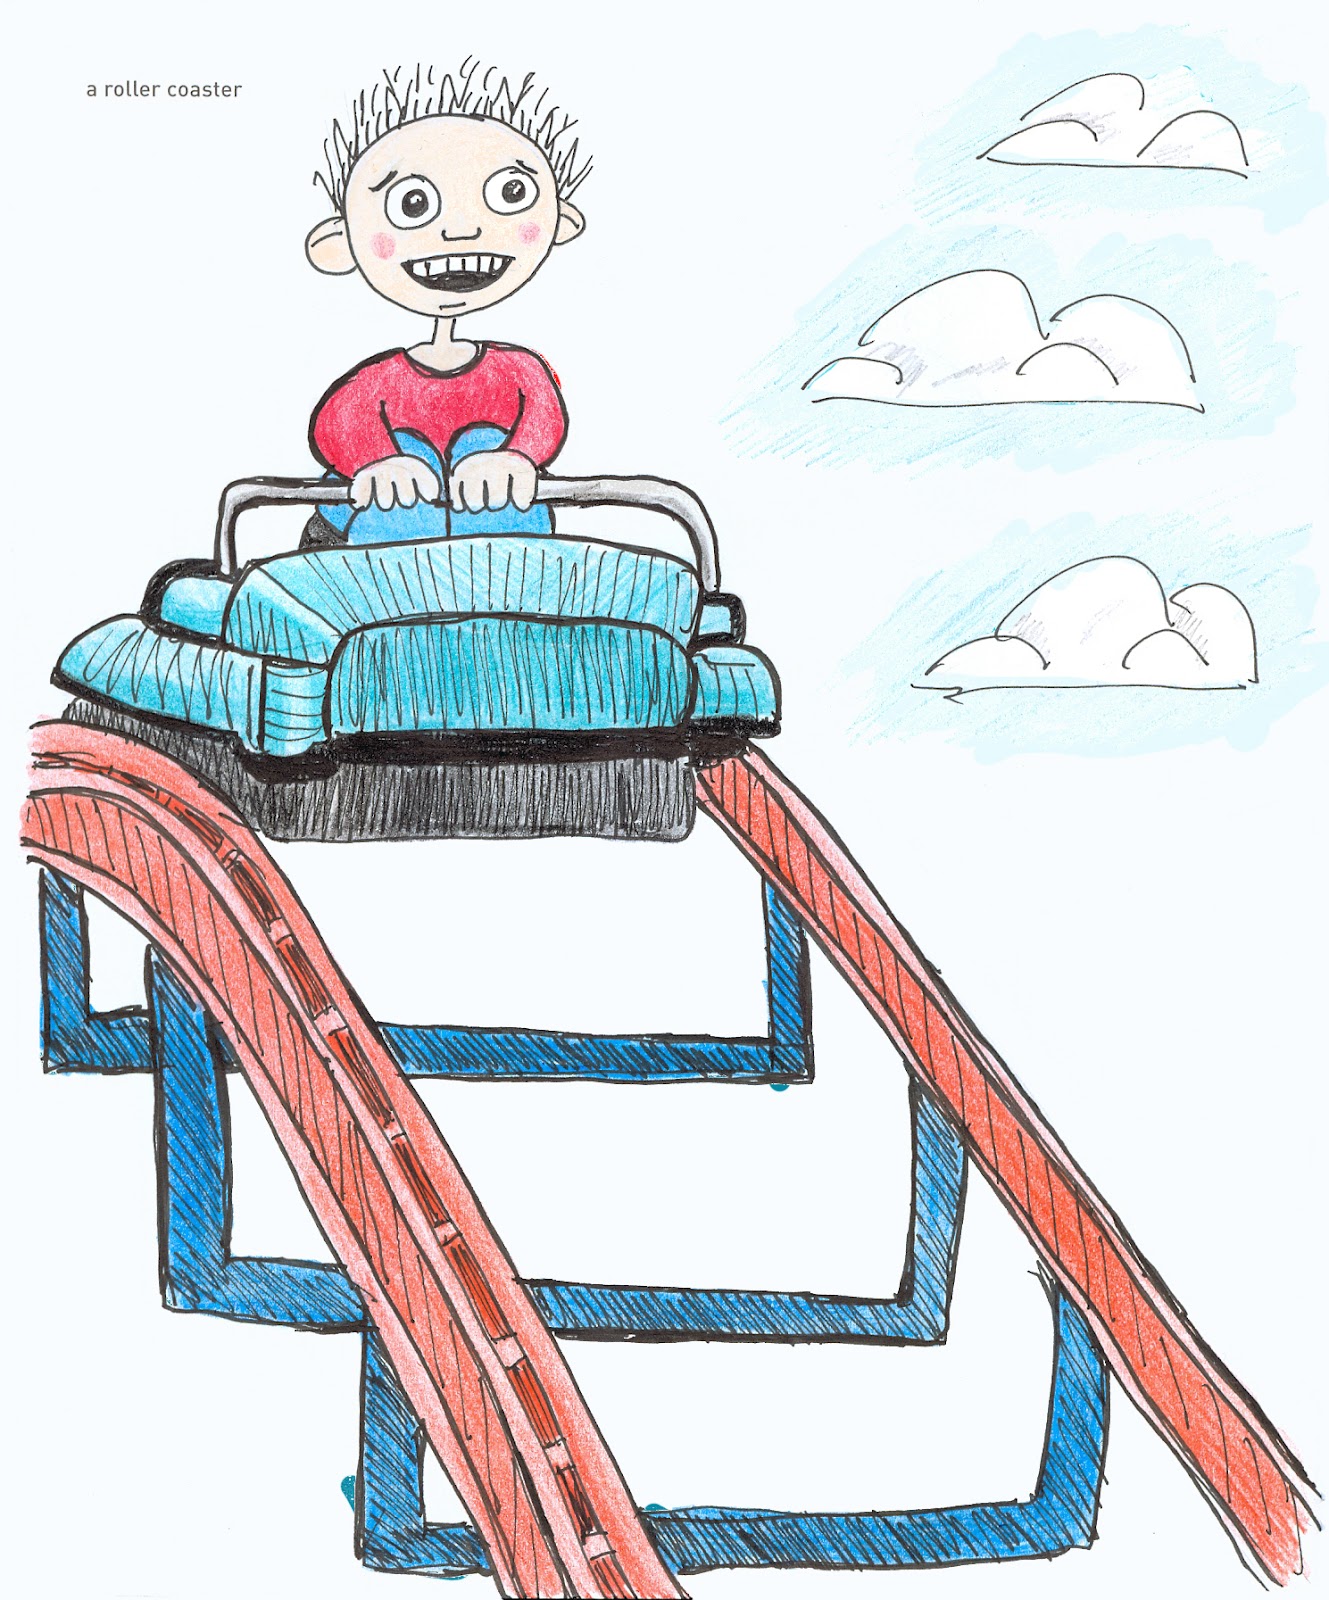 Roller coaster drawing clipart